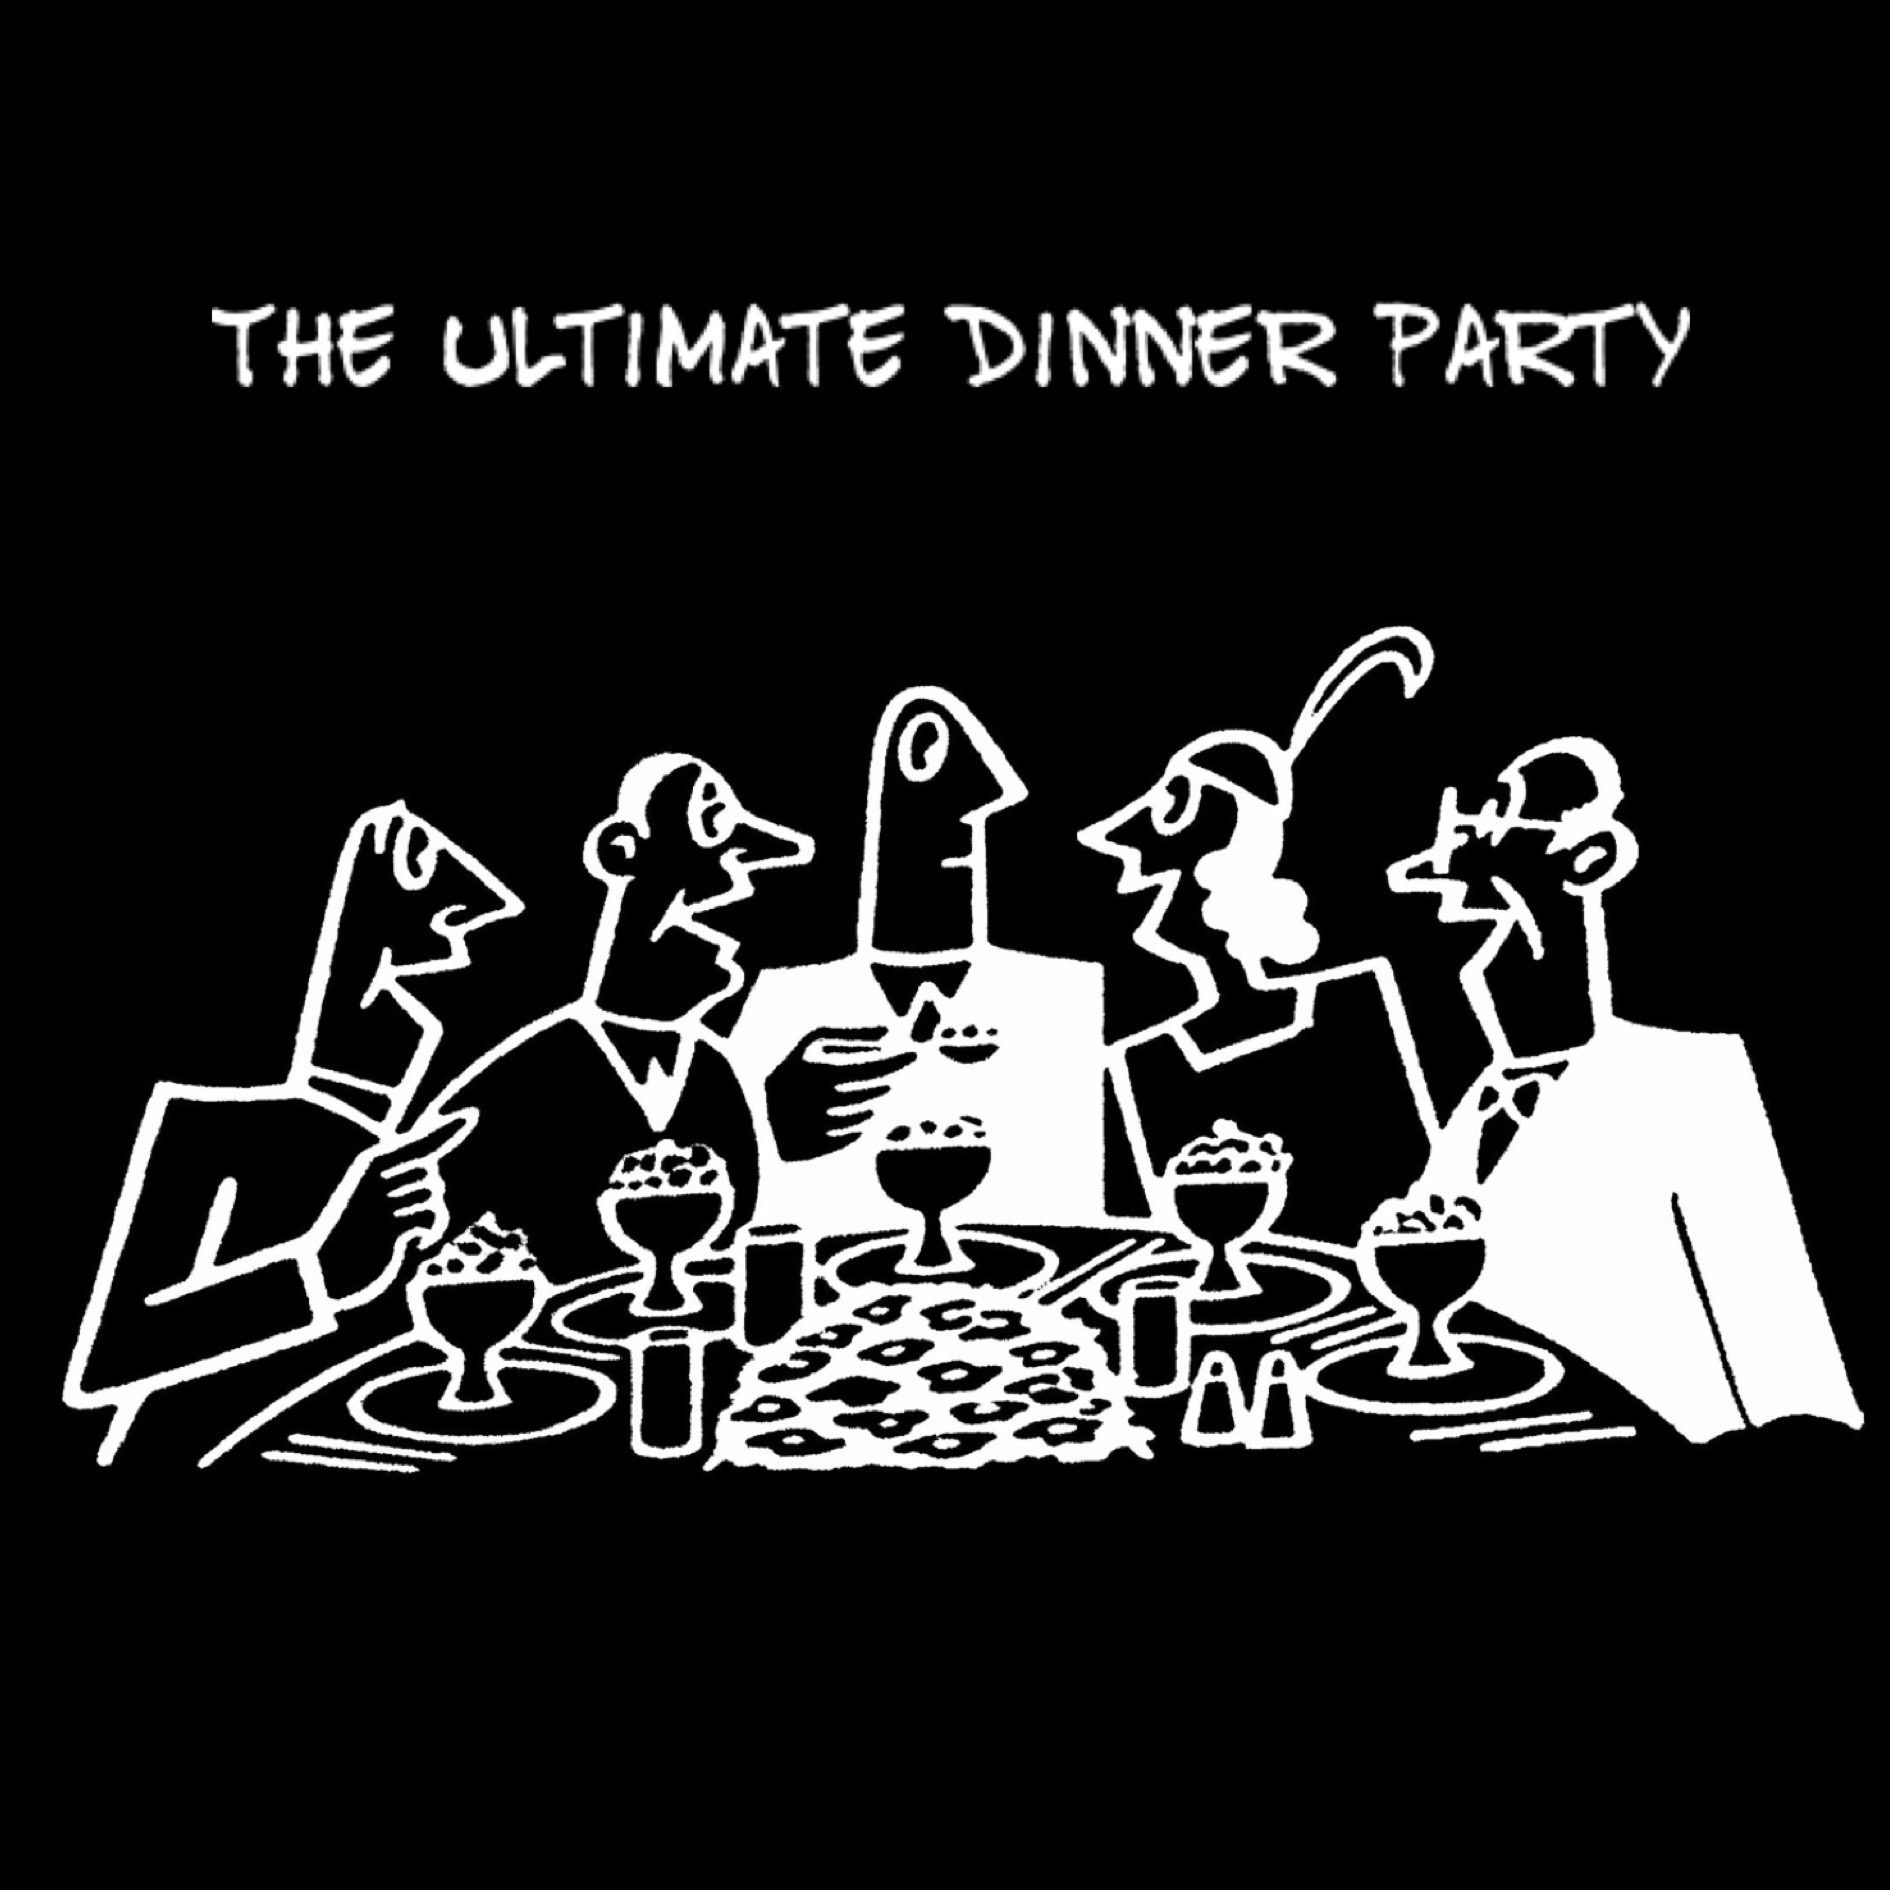 The Ultimate Dinner Party